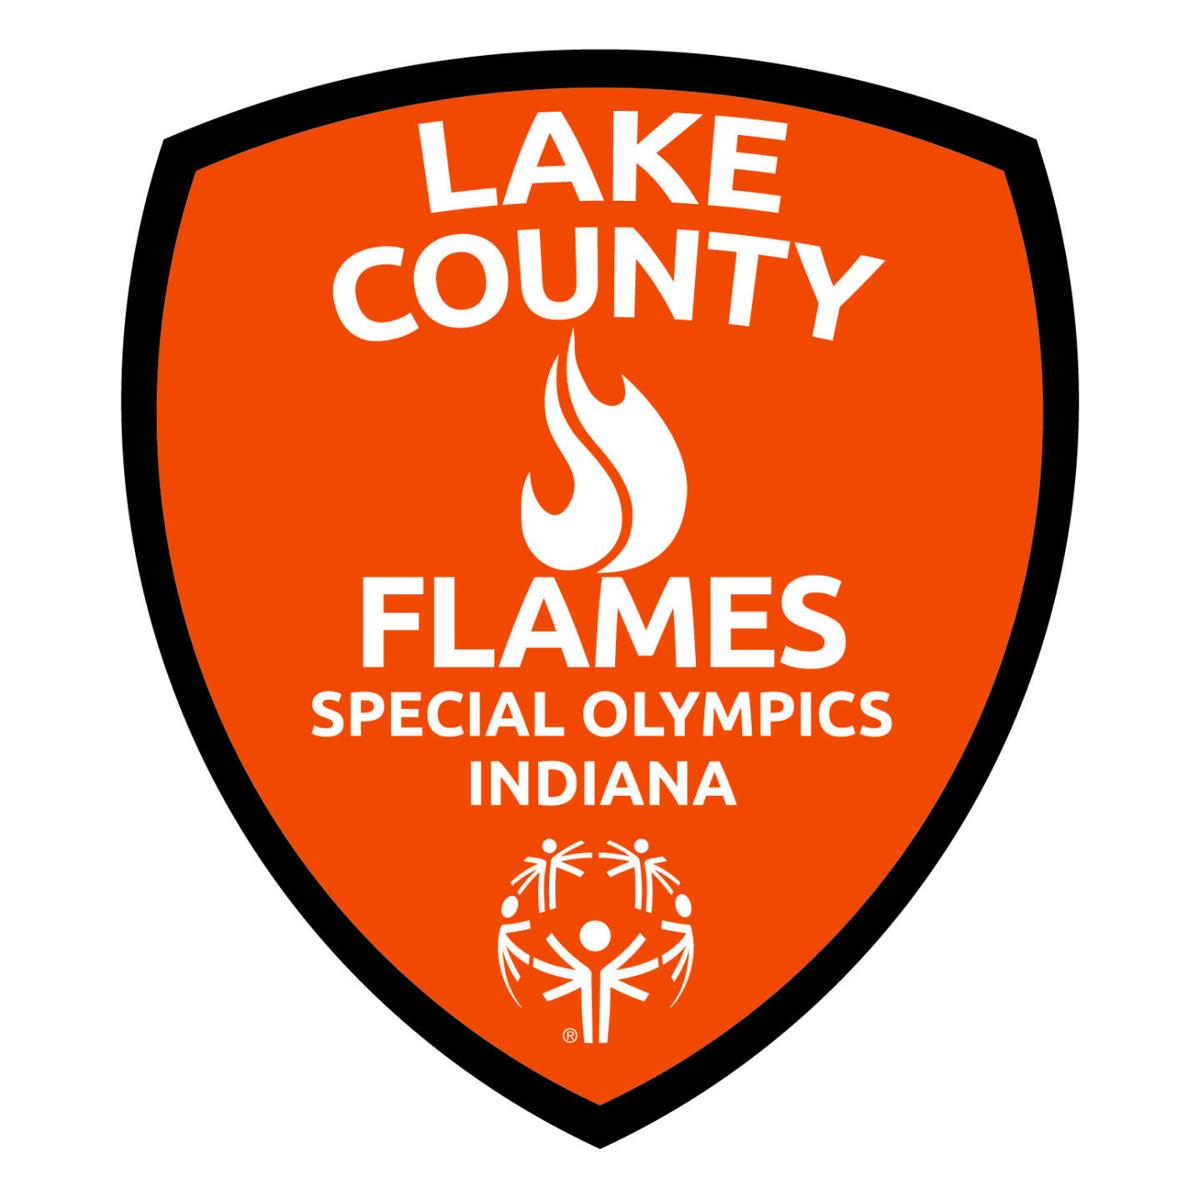 Special Olympics Lake County